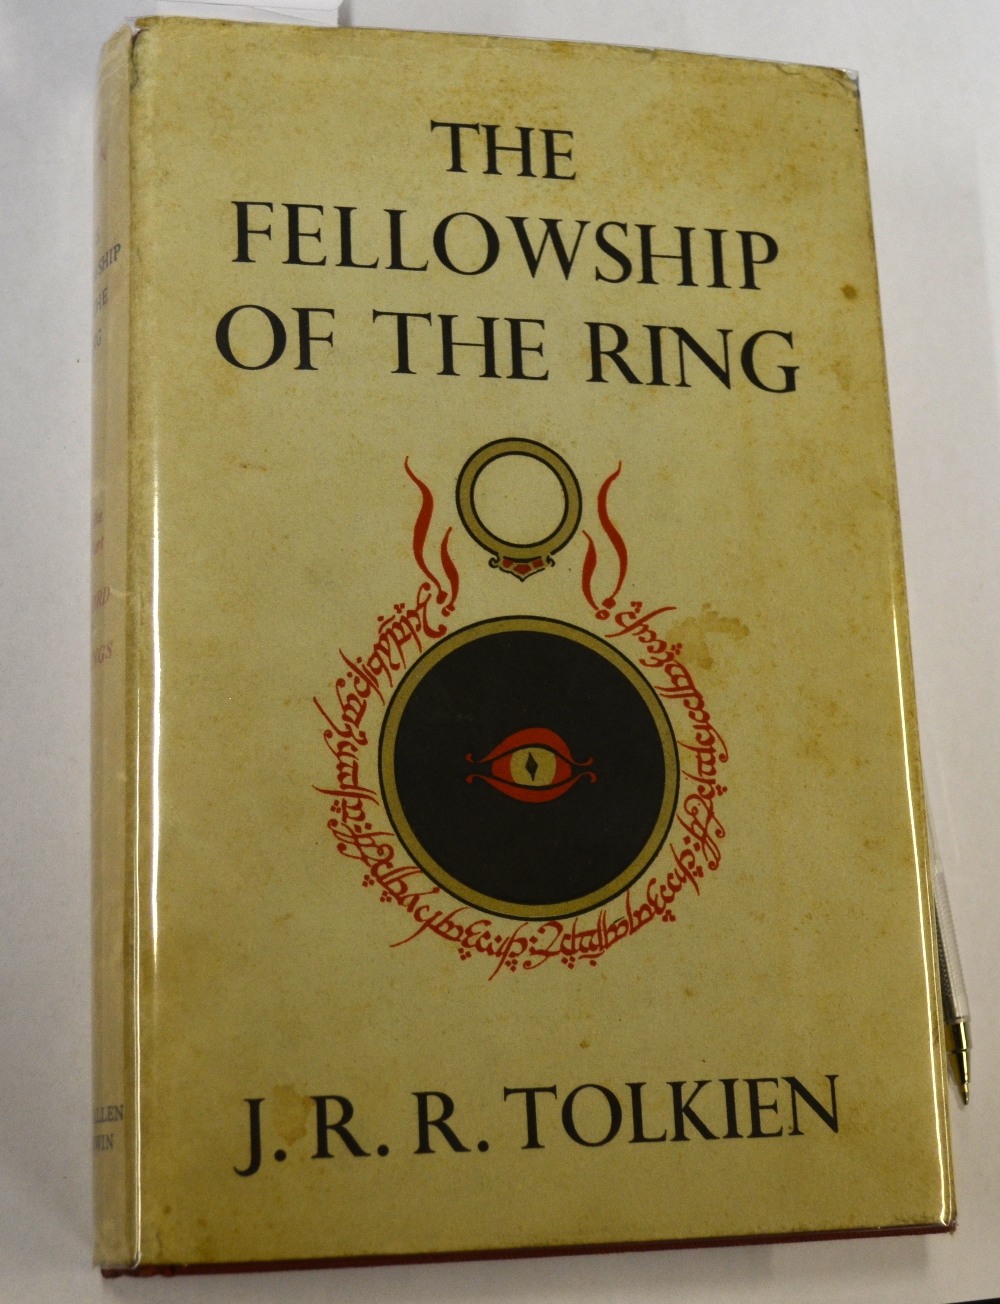 Tolkien J. R. R. - Lord of the Rings (early impressions): Fellowship of the Rings, 5th, 1956, The